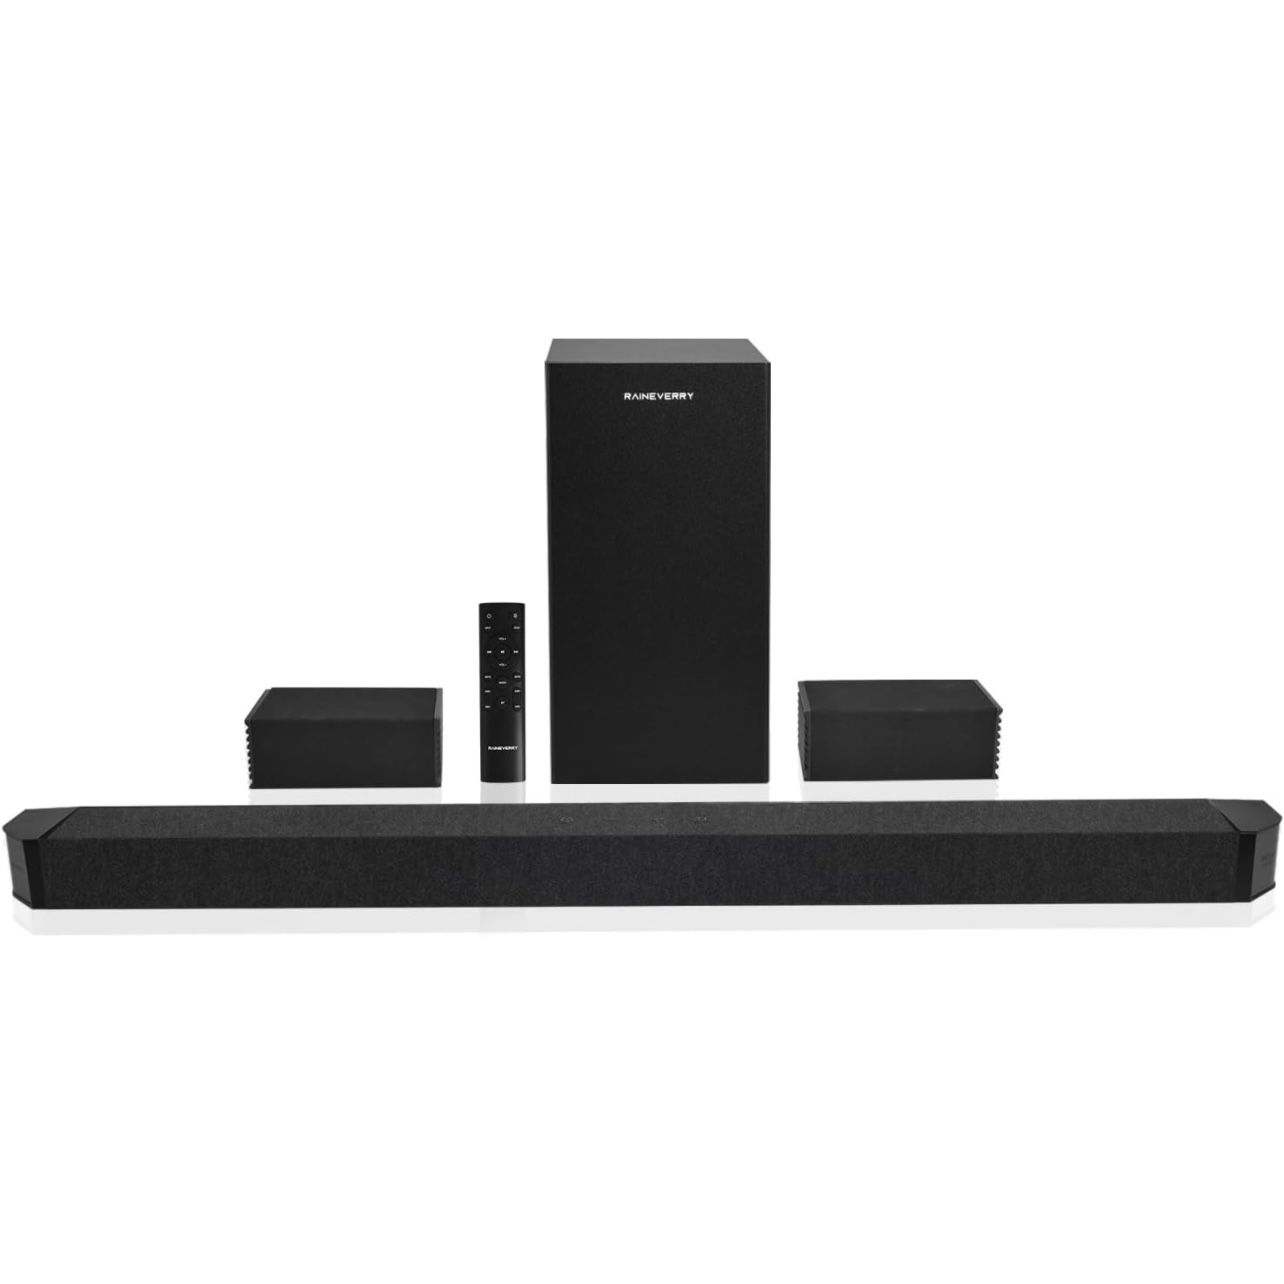 5.1.2 Premium Sound Bar with Dolby Atmos, Surround Sound Bars for TV, Wireless Subwoofer，Home Theater Surround Sound System, Bluetooth 5.1, Work with 